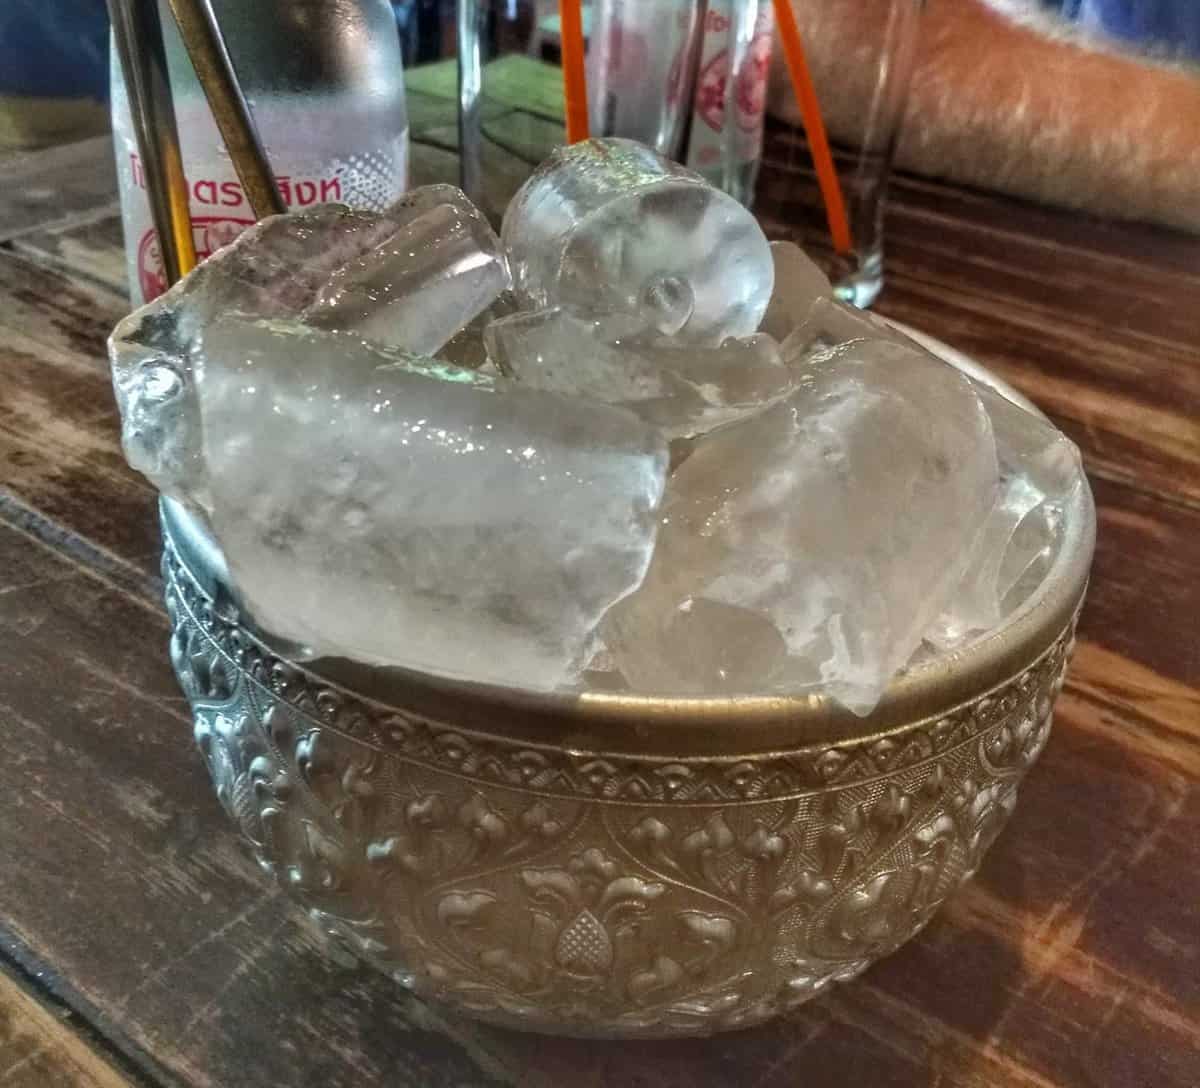 ice served in Thai design bowl - things you should know when traveling to Chiang Mai, Thailand